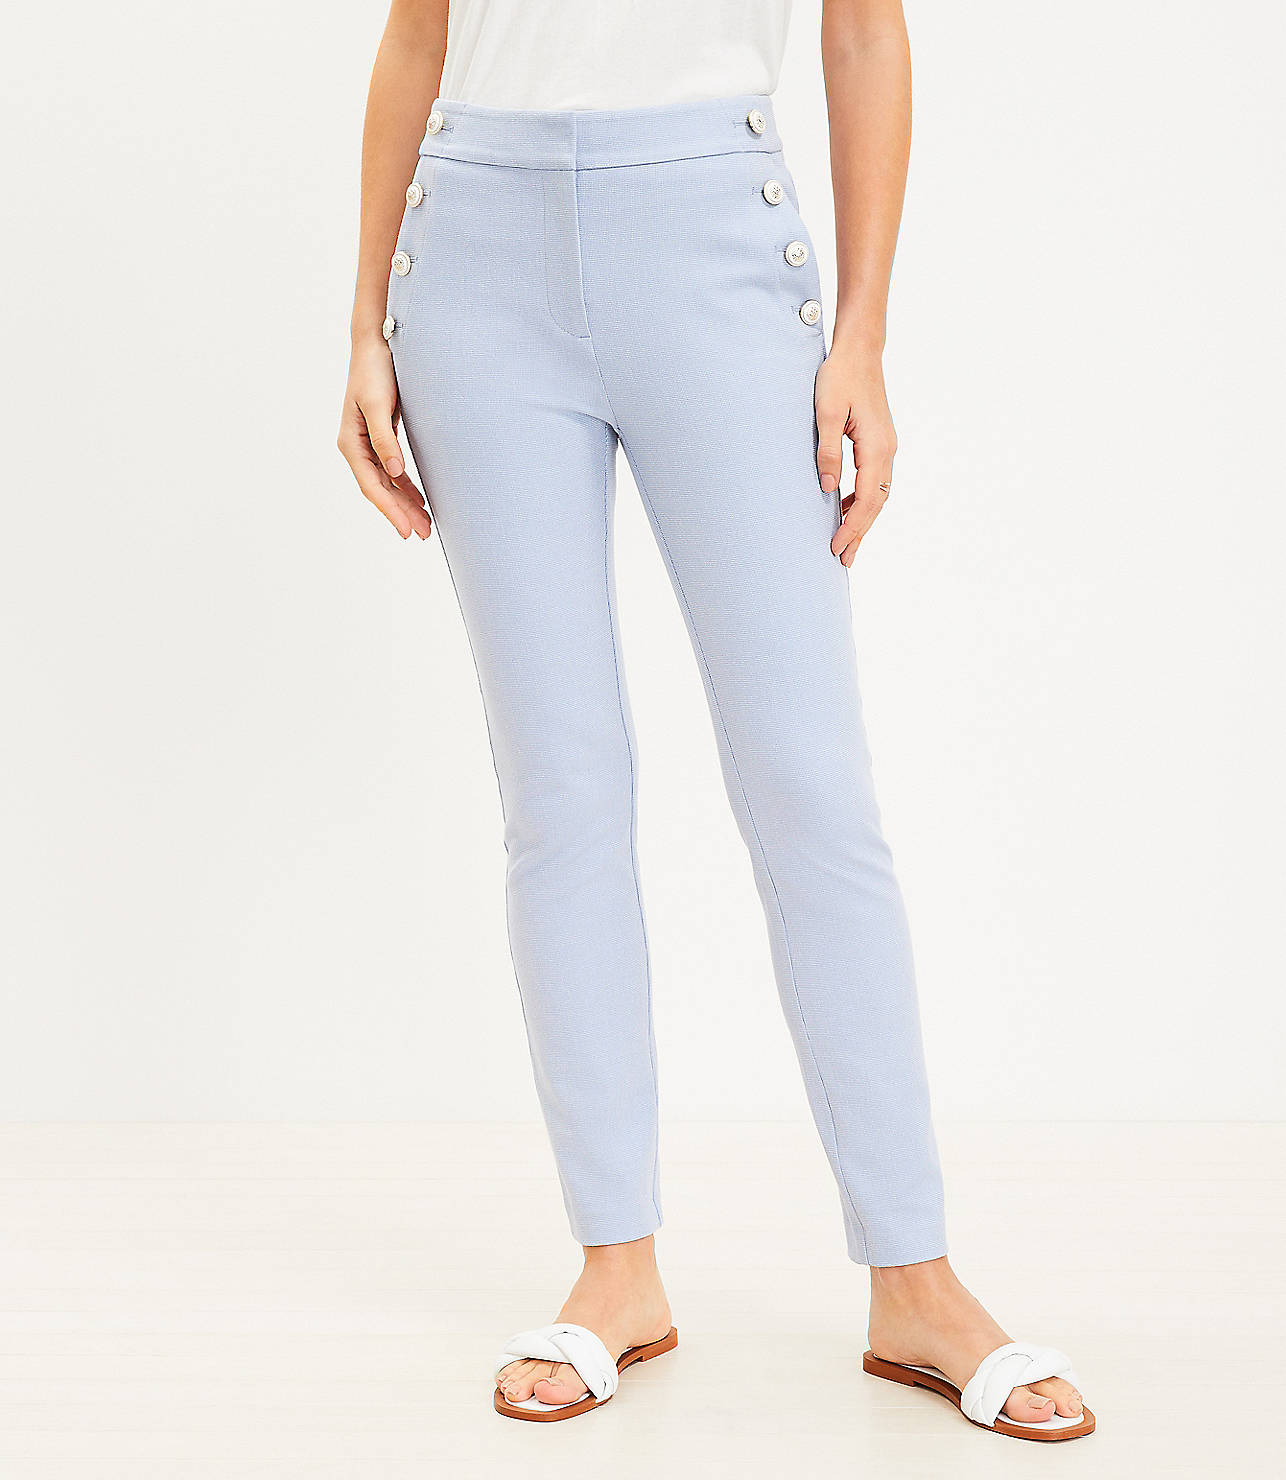 Sutton Skinny Sailor Pants in Texture